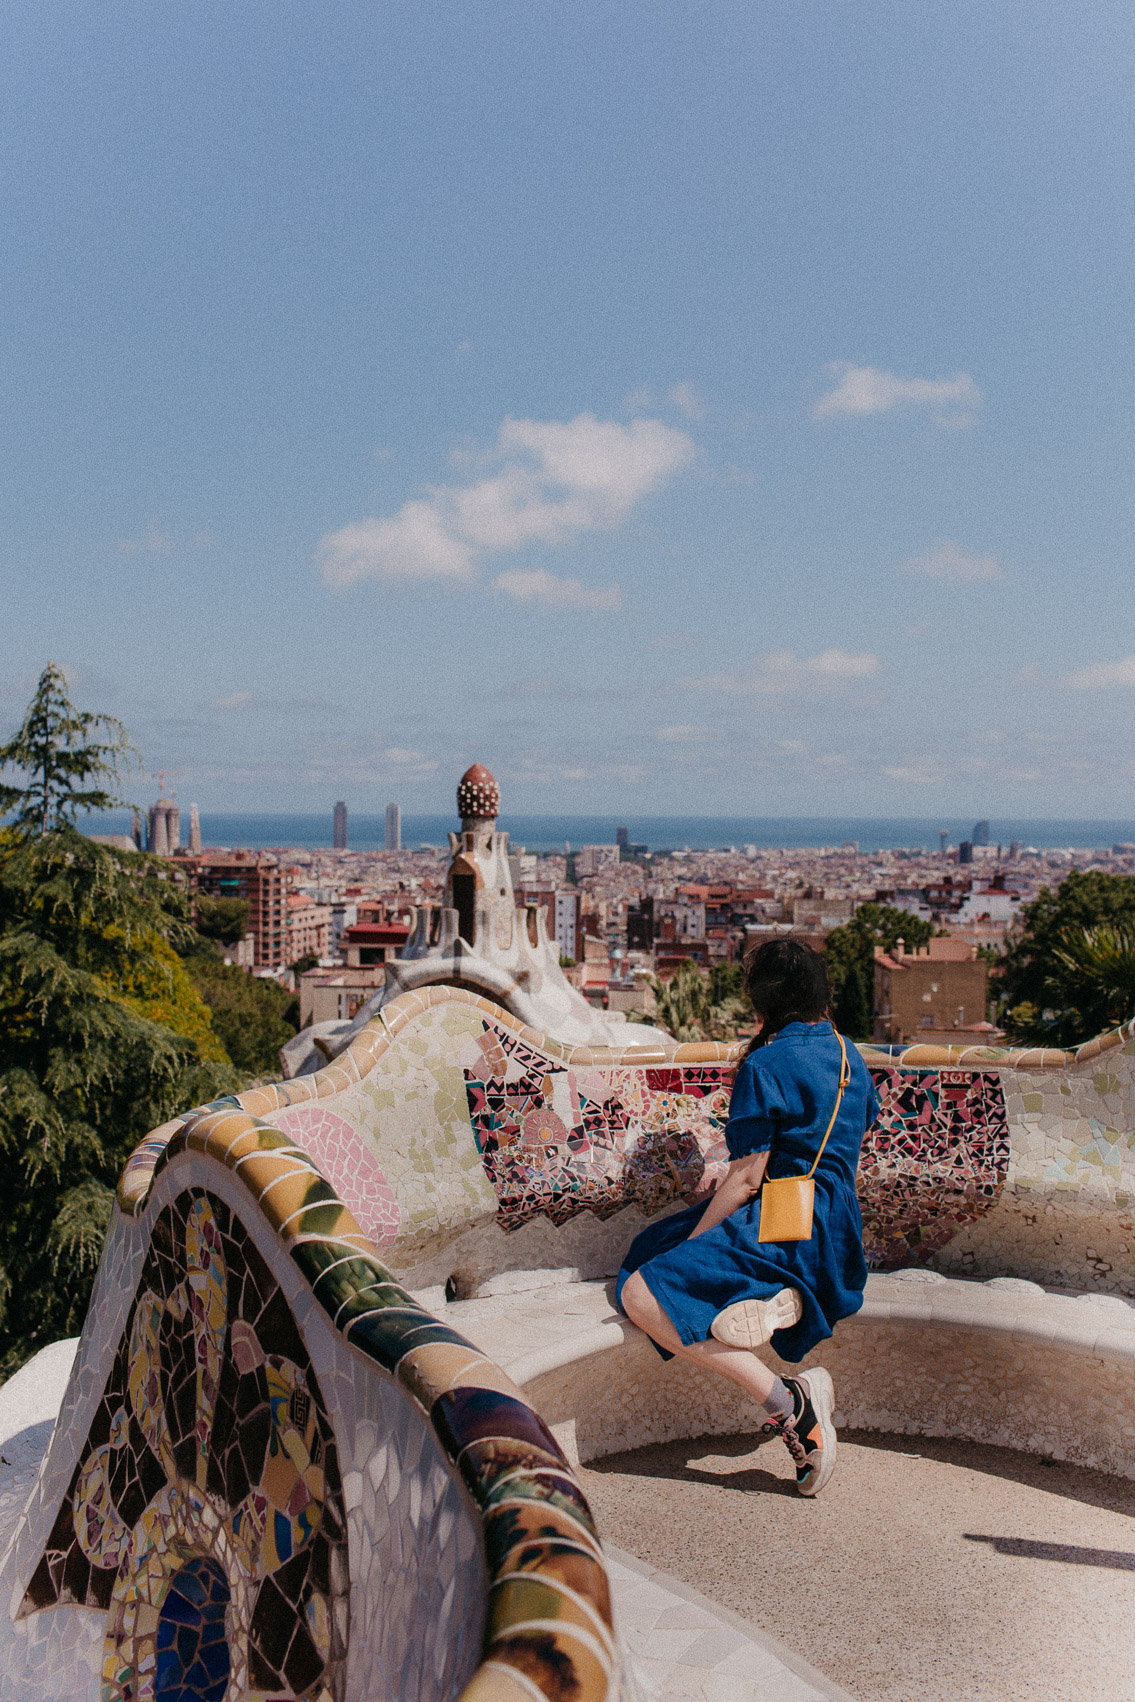 Park Guell Barcelona 2020 - The cat, you and us